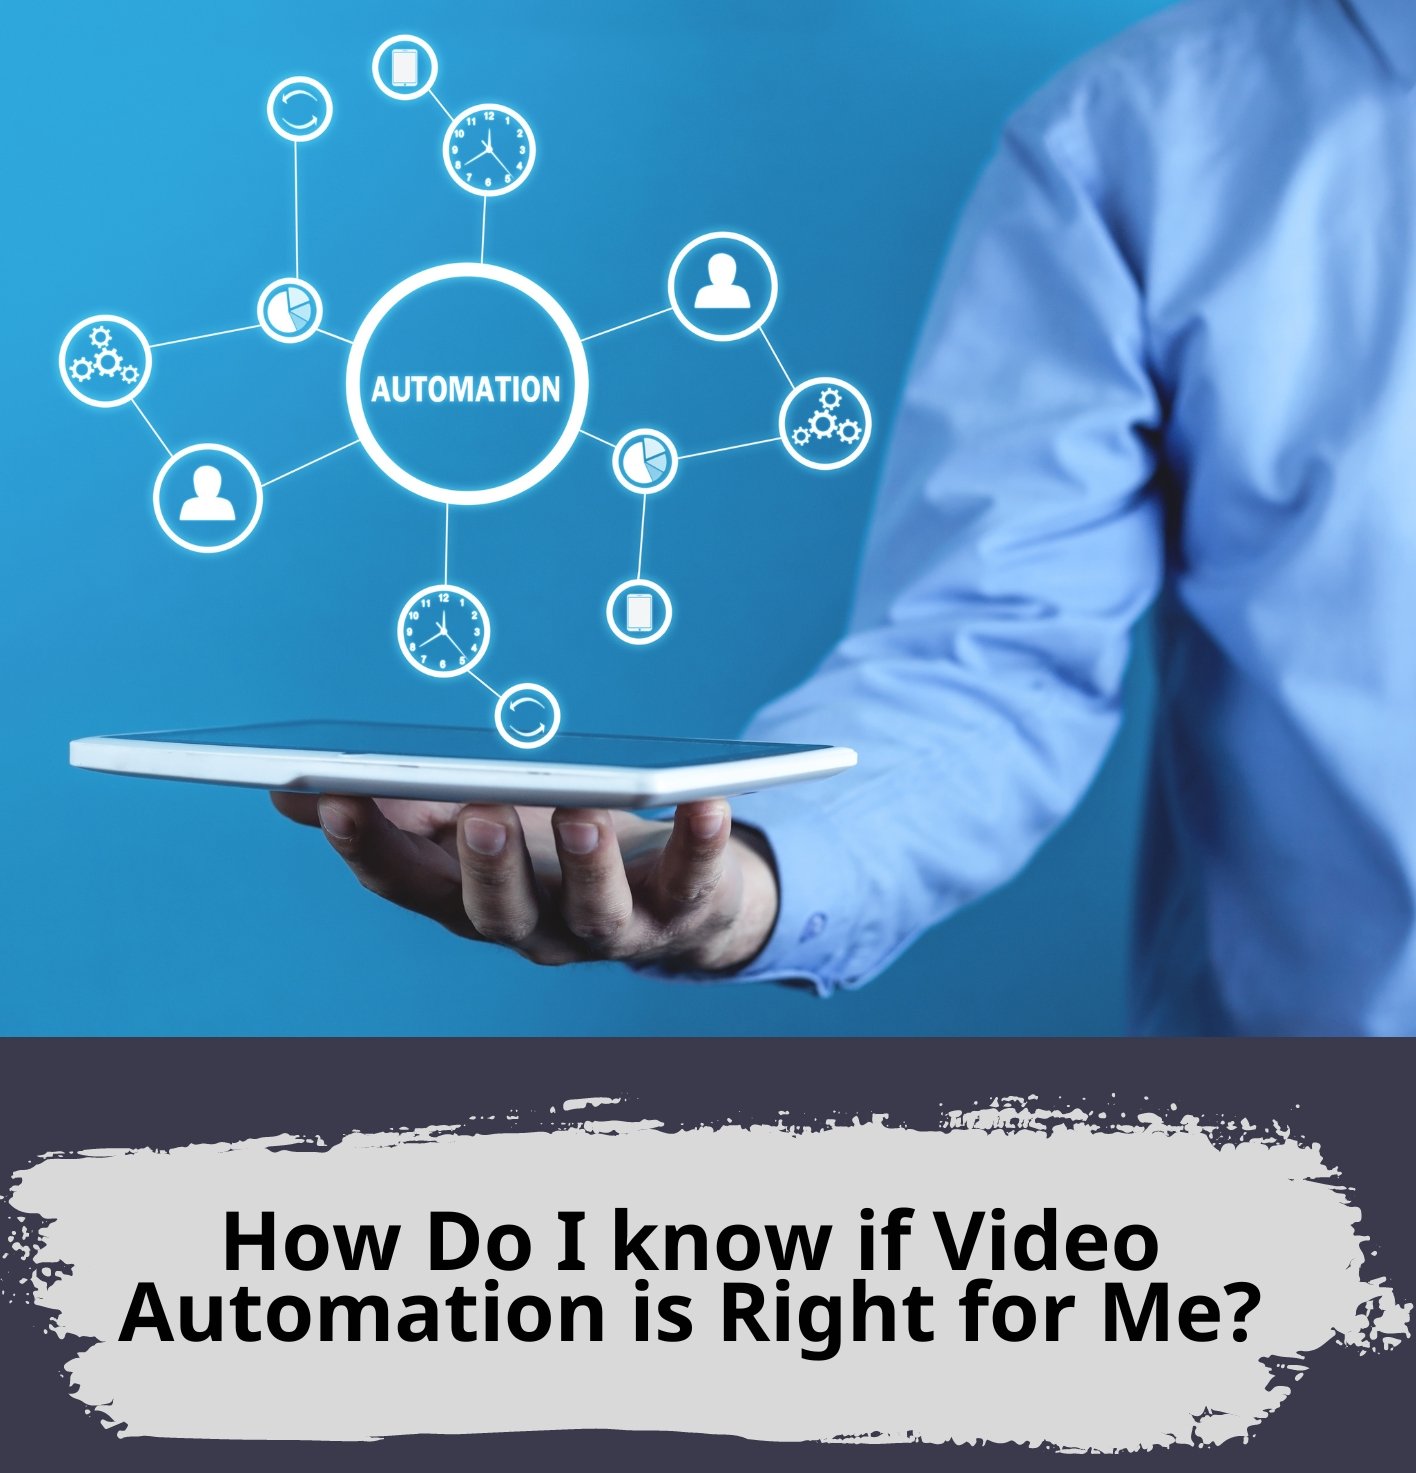 How Do I know if Video Automation is Right for Me?